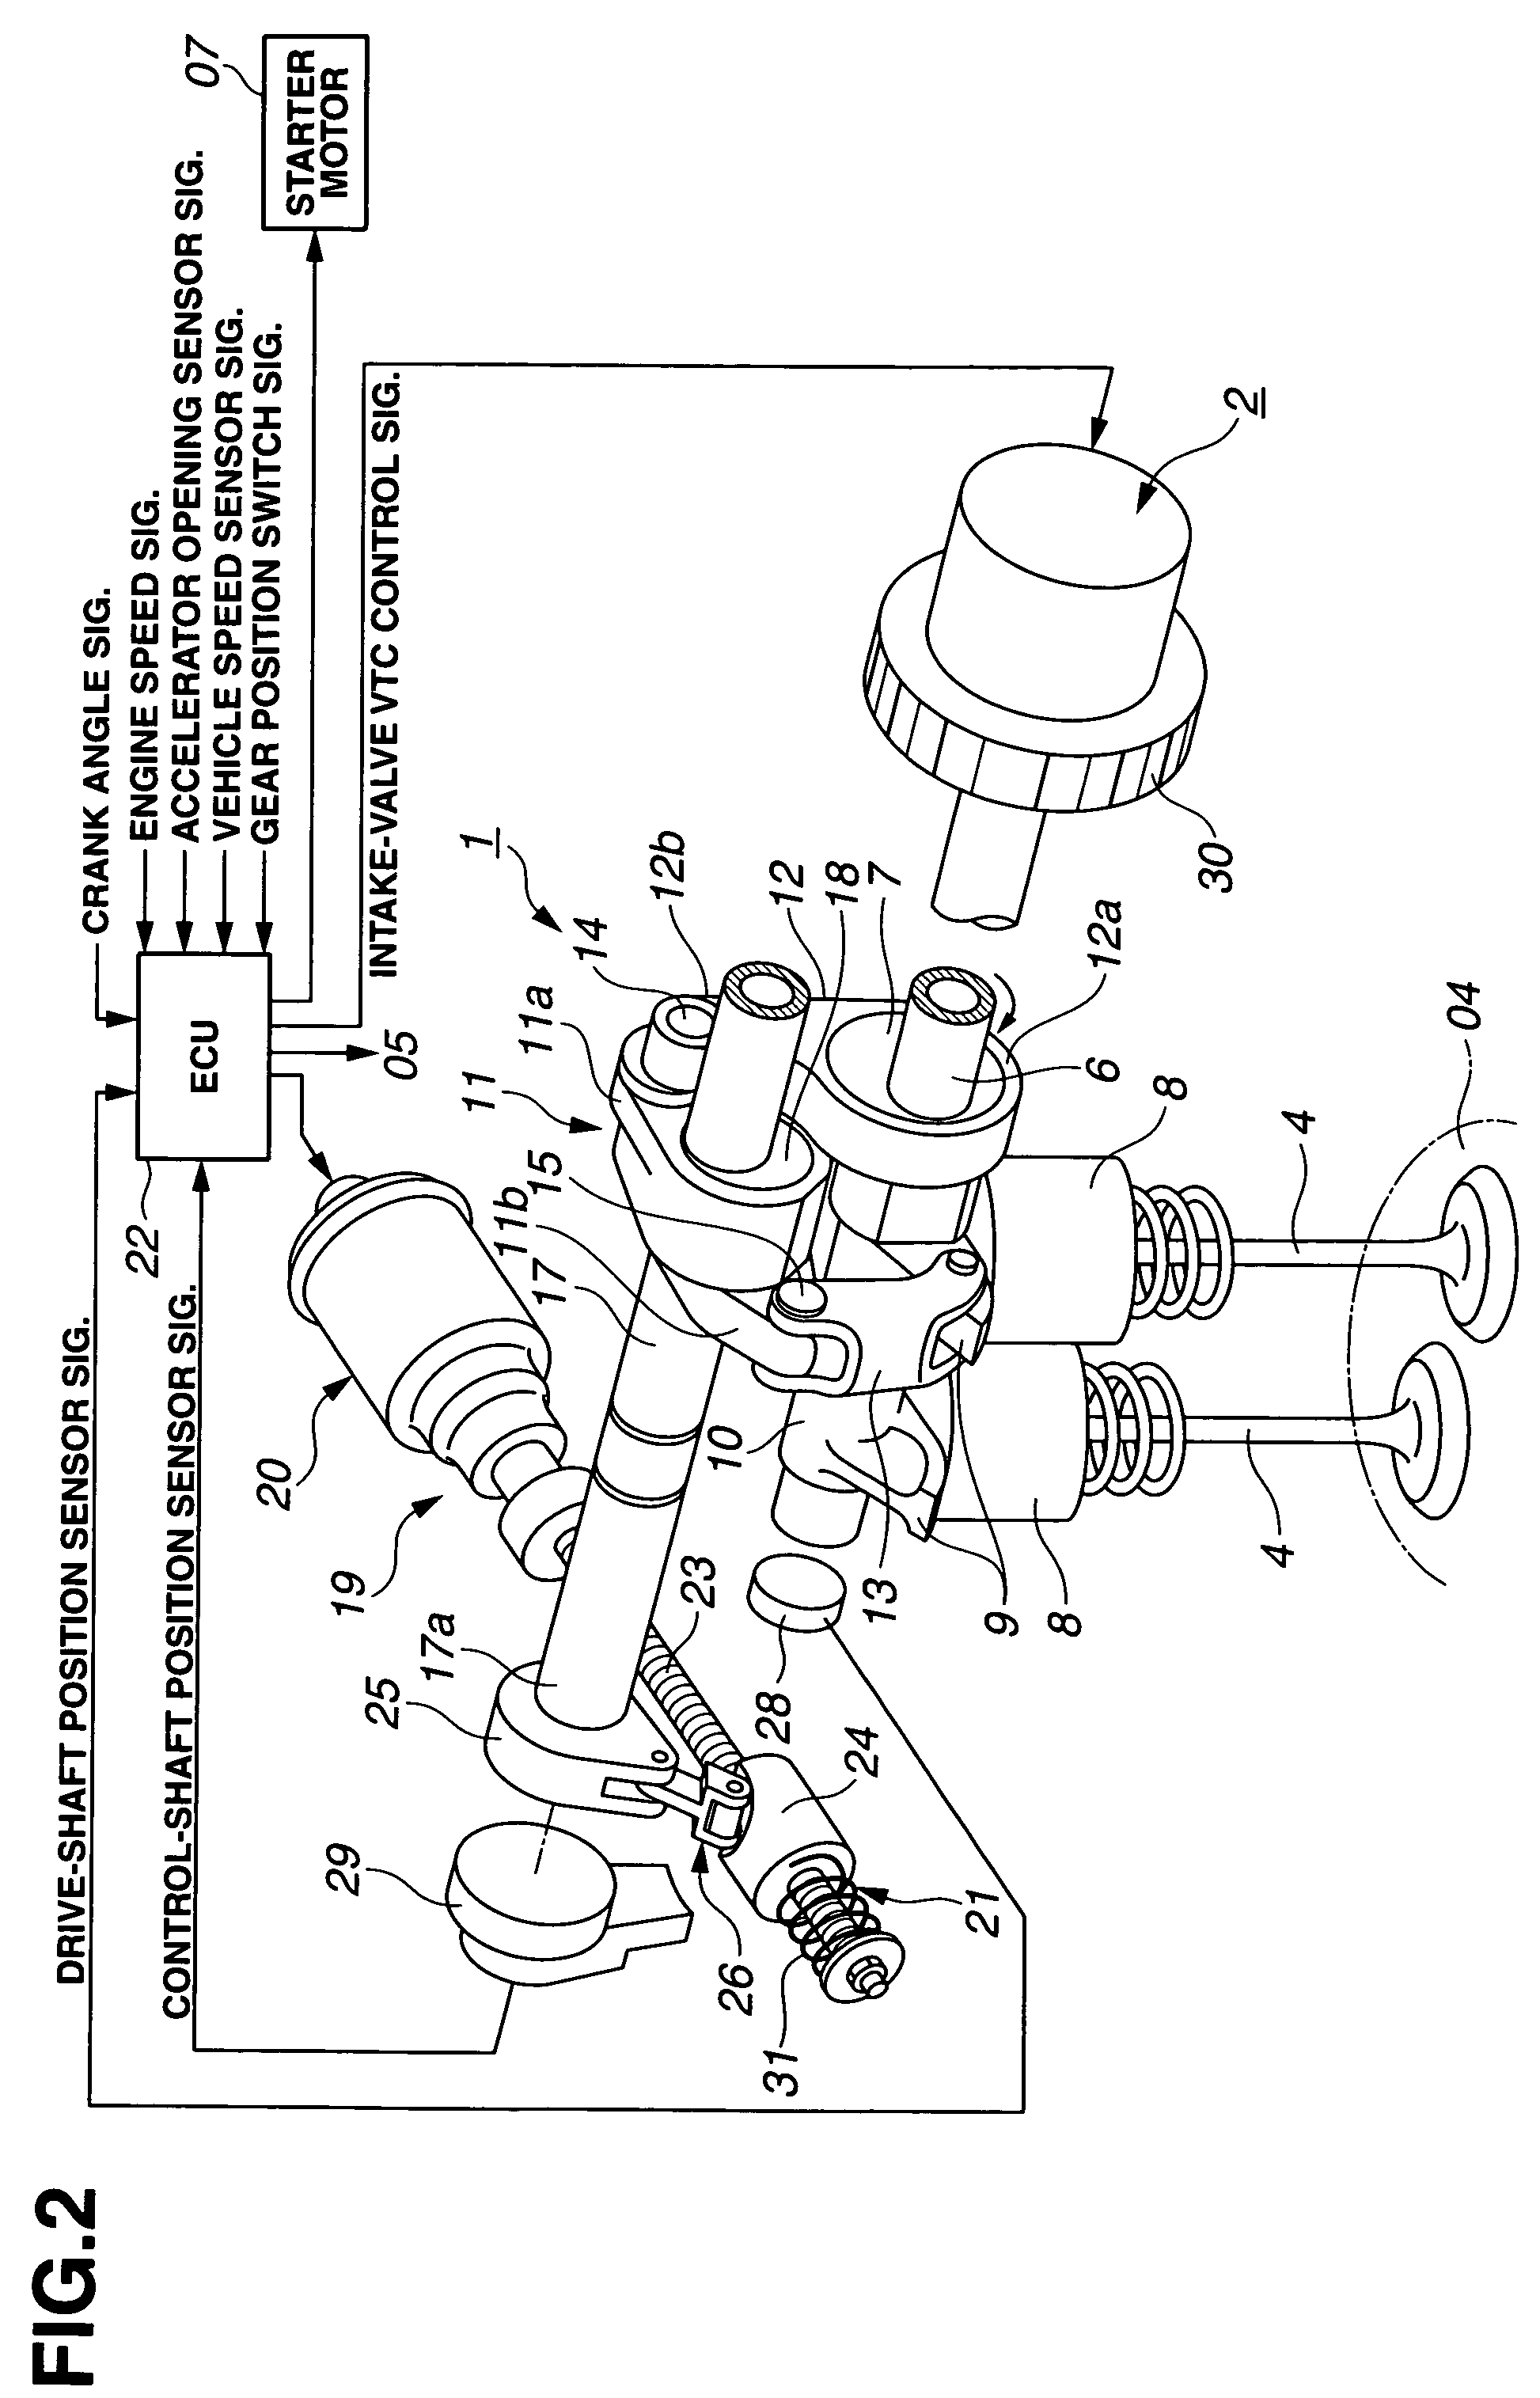 Variable valve actuation system of internal combustion engine